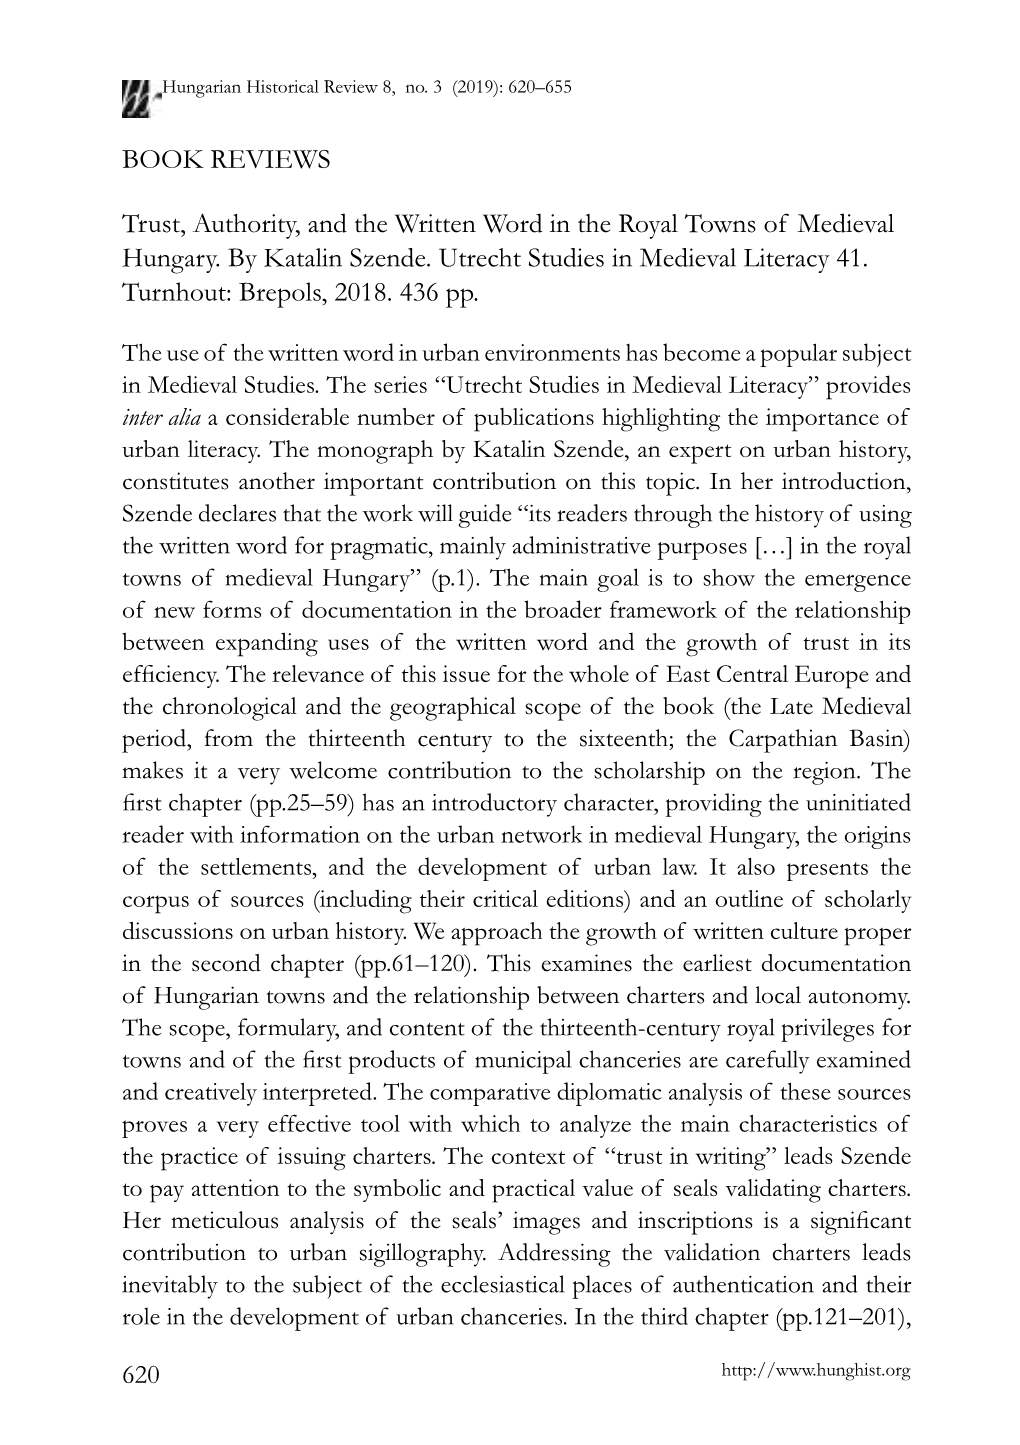 BOOK REVIEWS Trust, Authority, and the Written Word in the Royal Towns of Medieval Hungary. by Katalin Szende. Utrecht Studies I